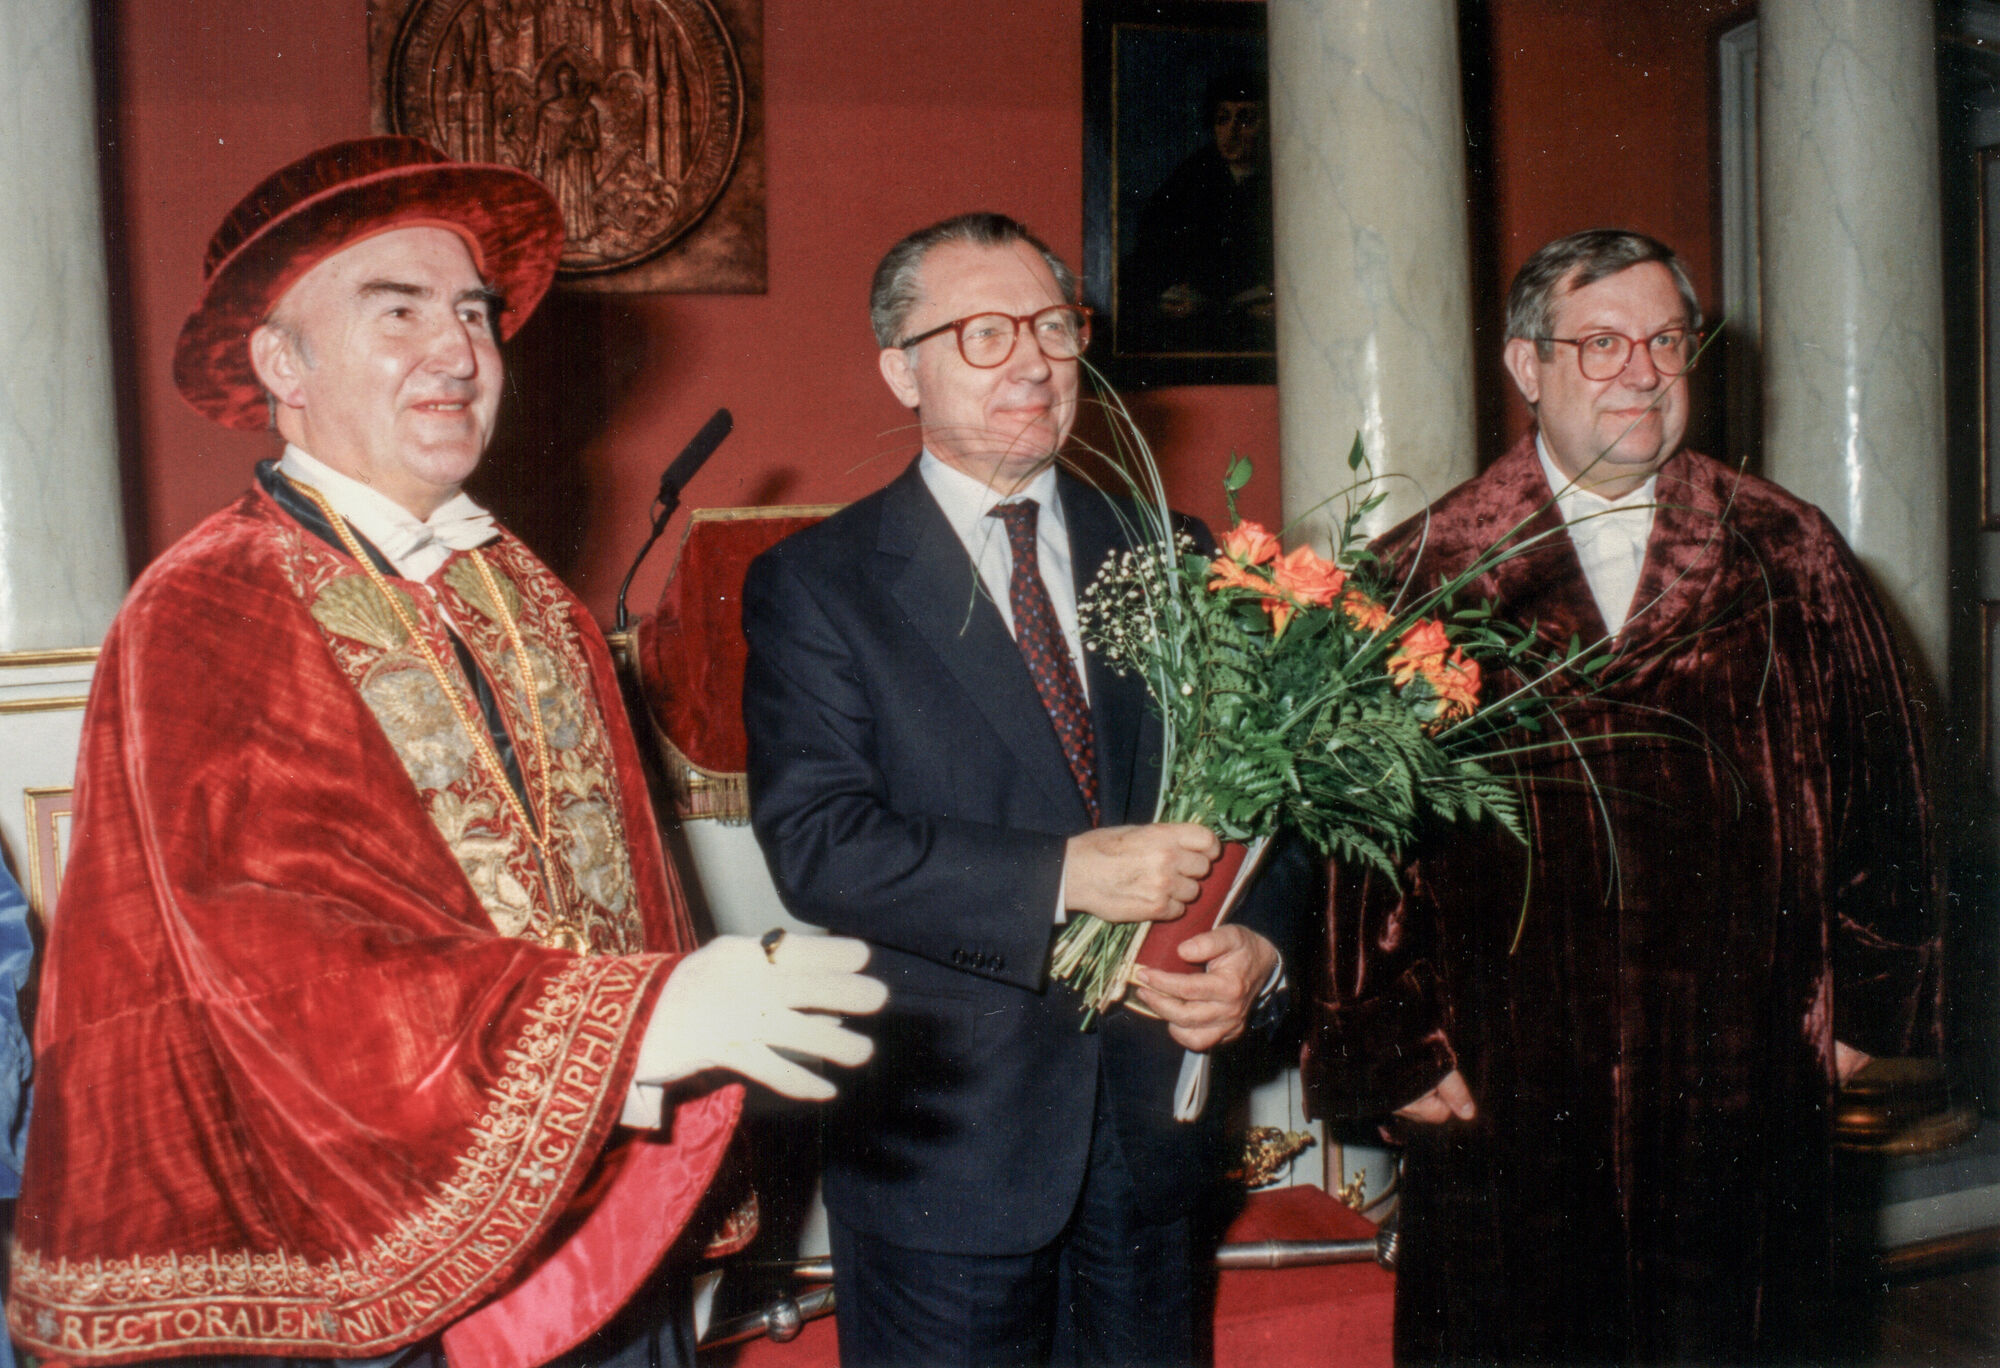 Honorary doctorate being awarded to Jacques Delors in the University's Aula with the former Rector Prof. Zobel in 1994 